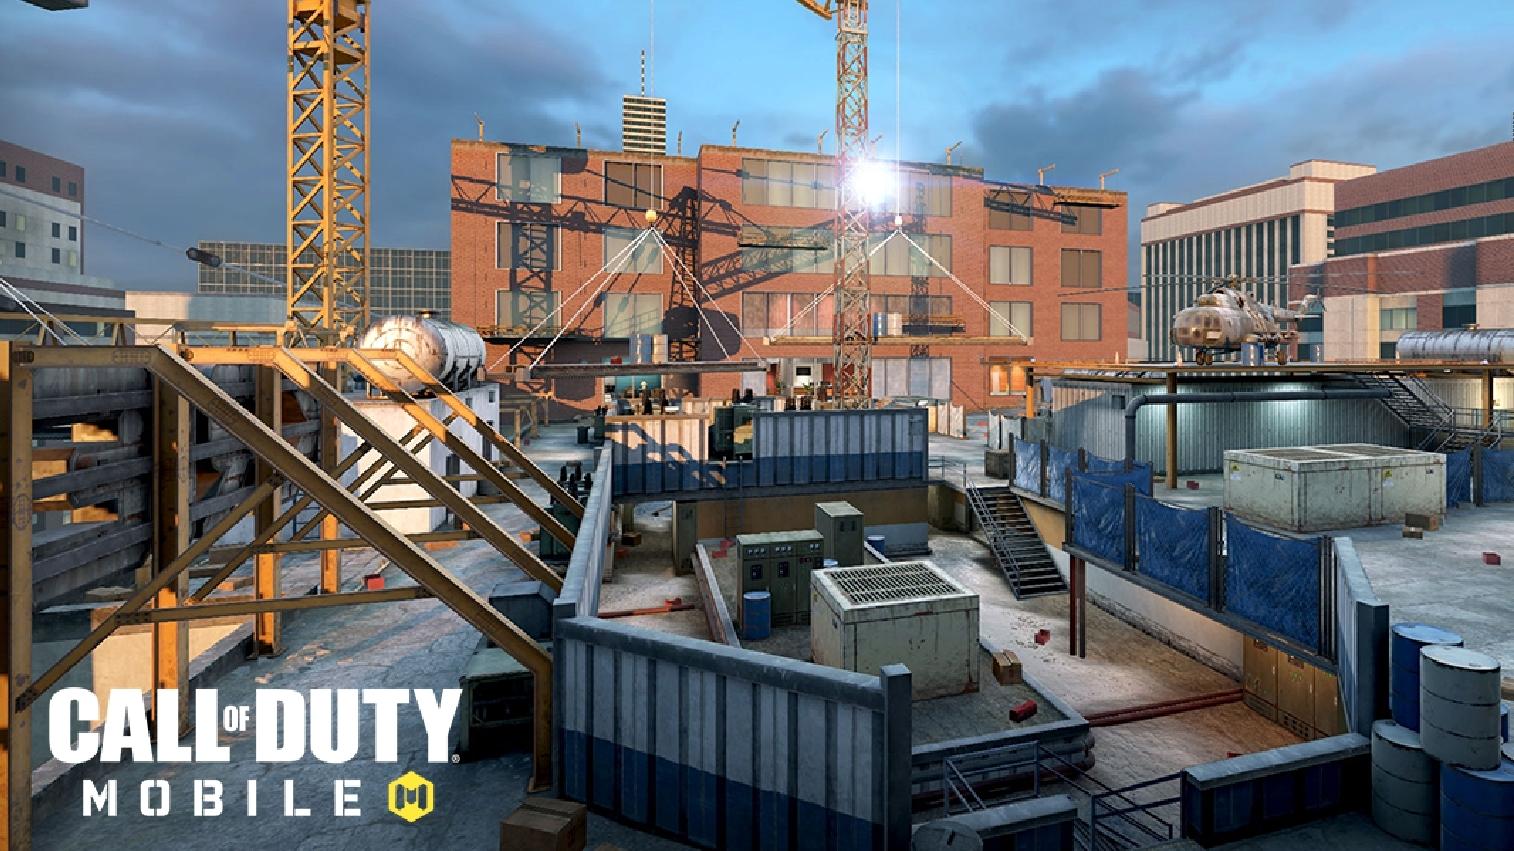 Call of Duty Mobile confirms a new CAGE map is arriving soon